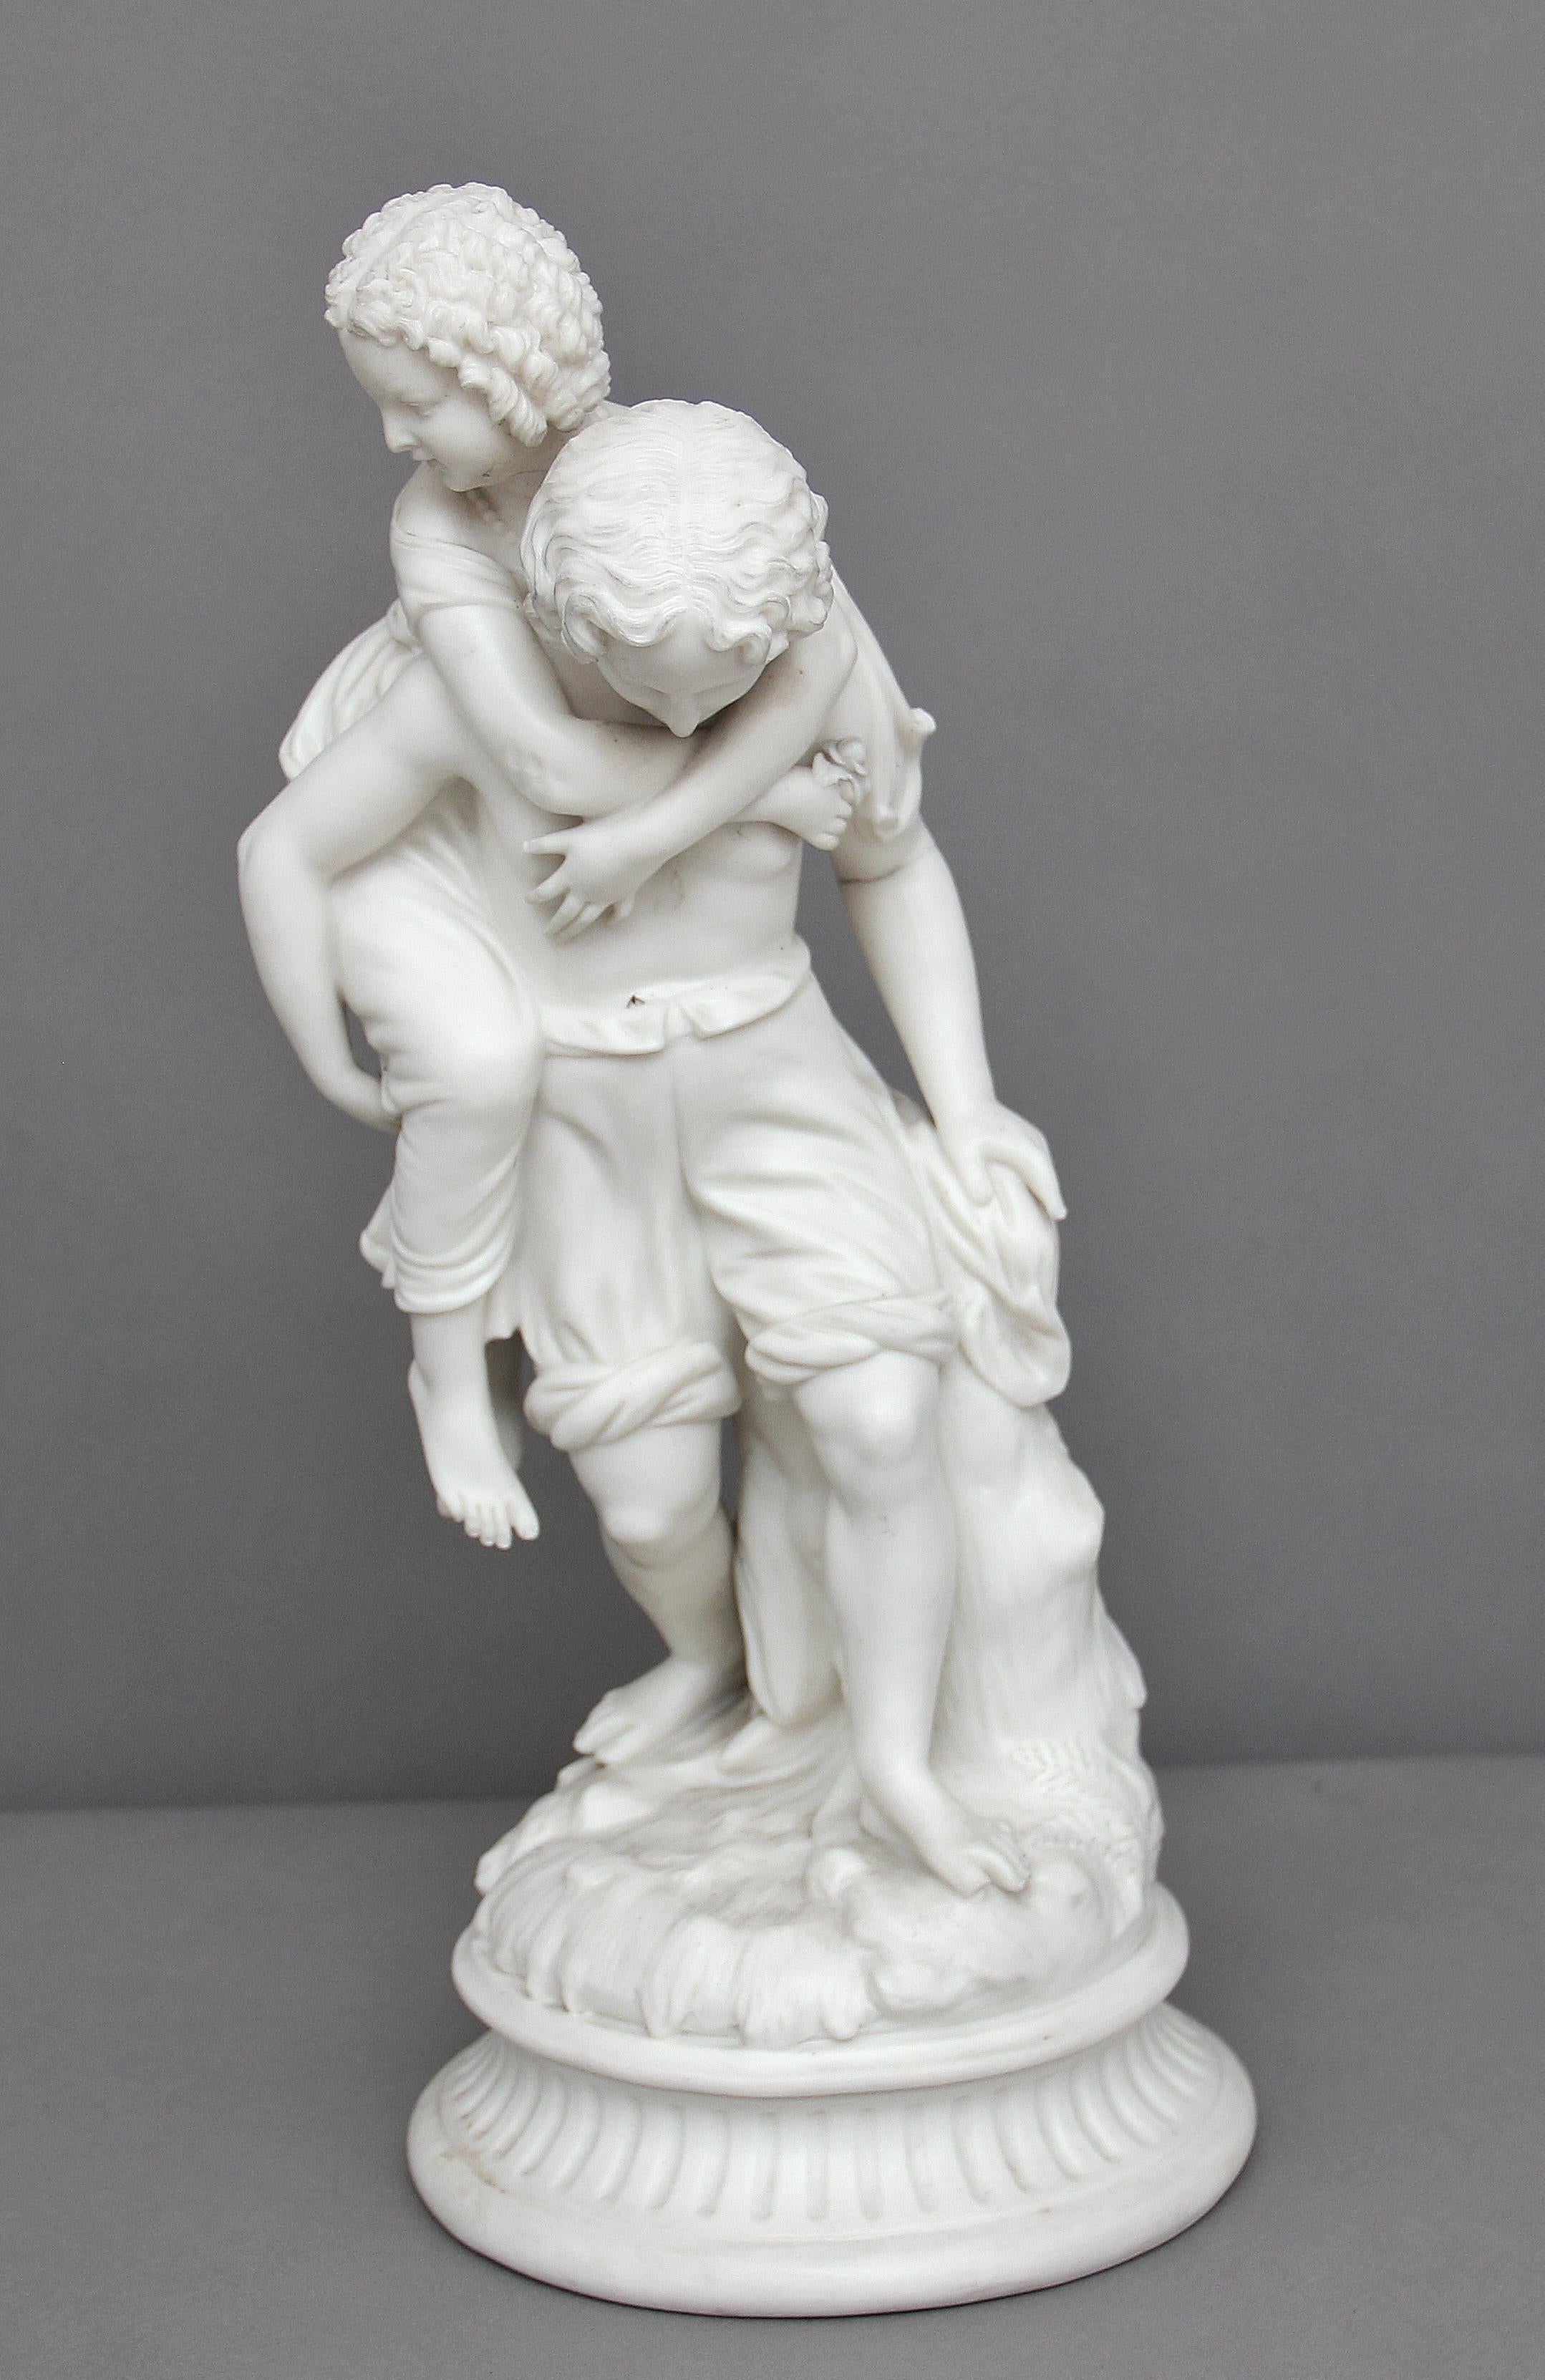 19th century parian figure of a boy with a girl upon his back, on a rocky outcrop. Slight damage on the boys toe, circa 1860.